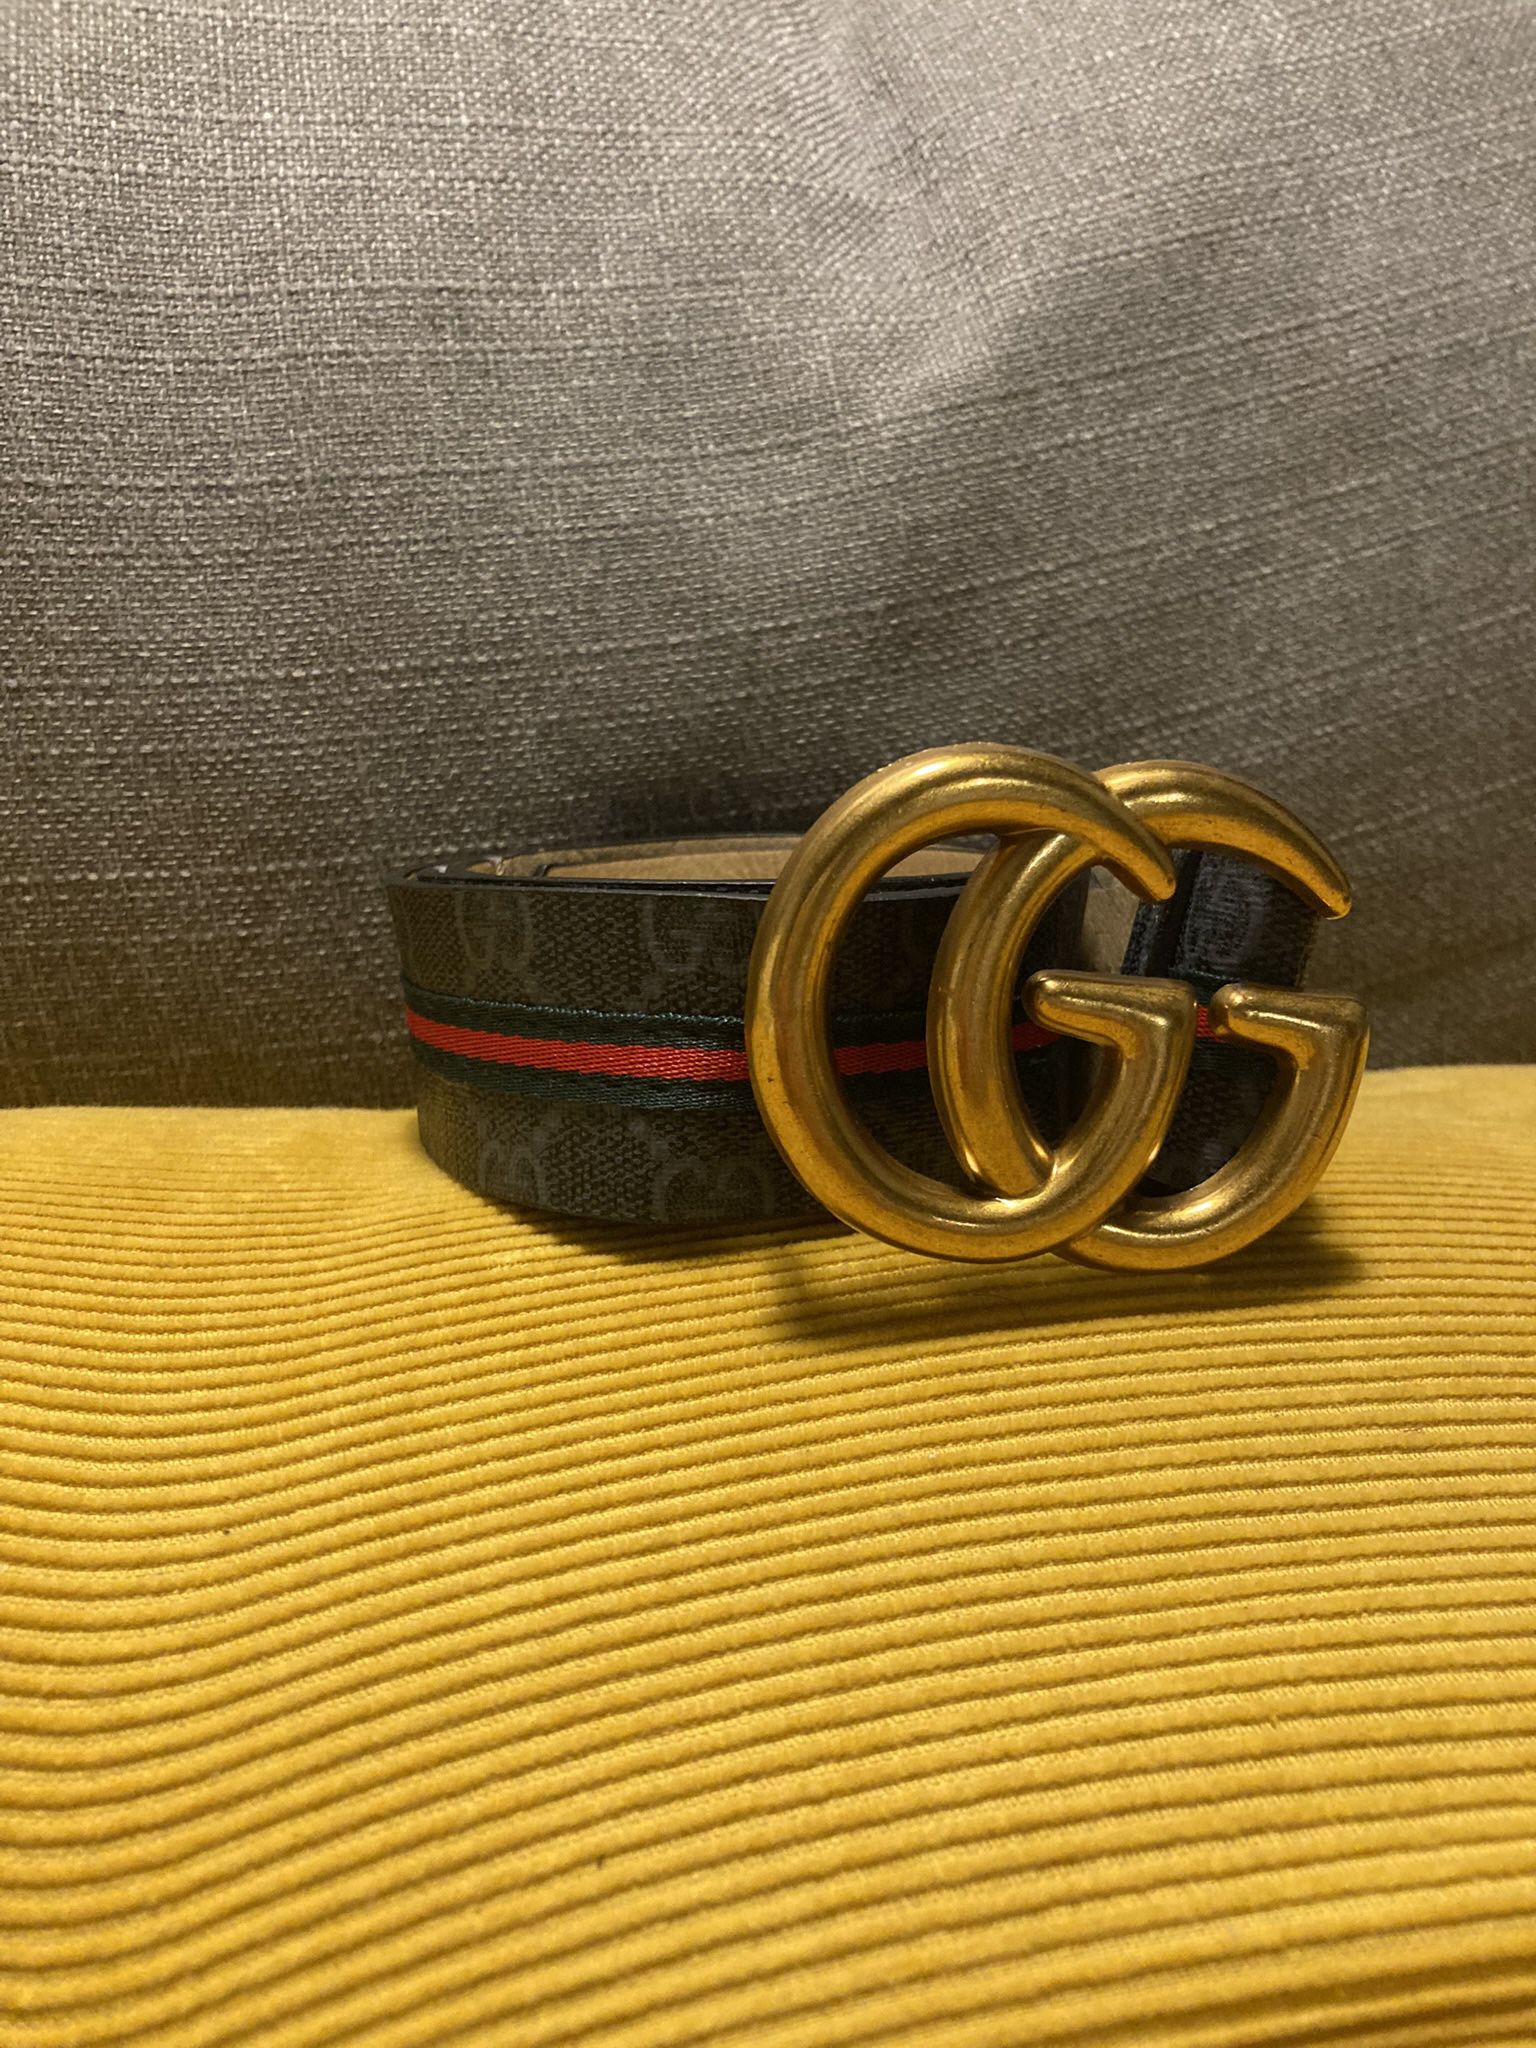 Gucci belts in various designs